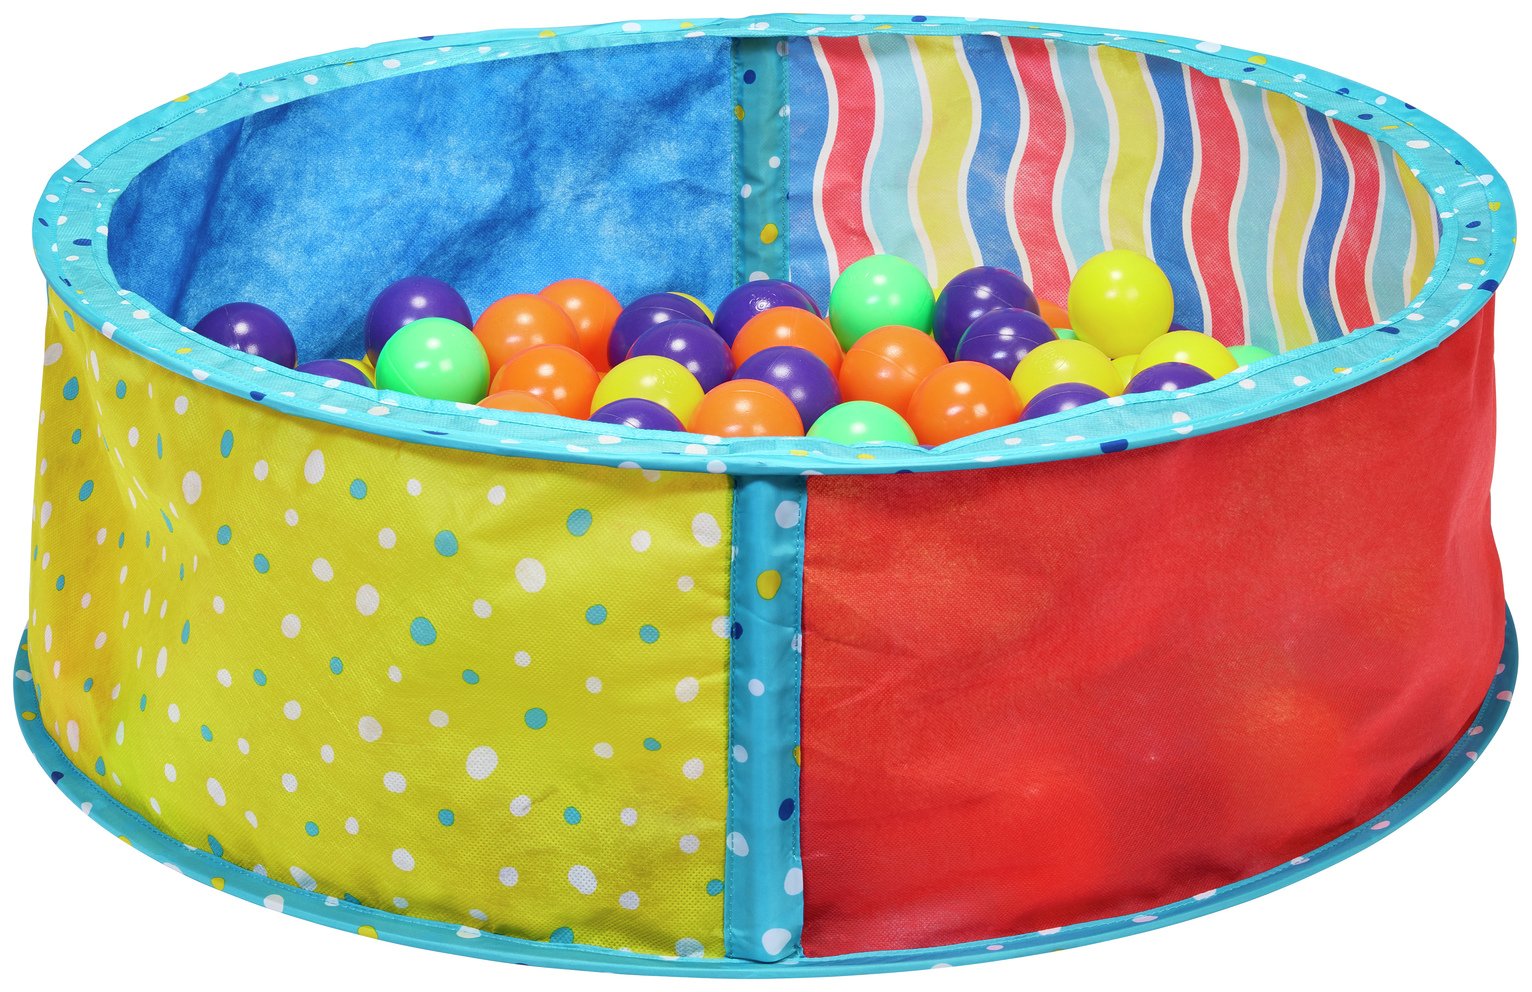 Chad Valley Indoor Ball Pit Activity Toy review